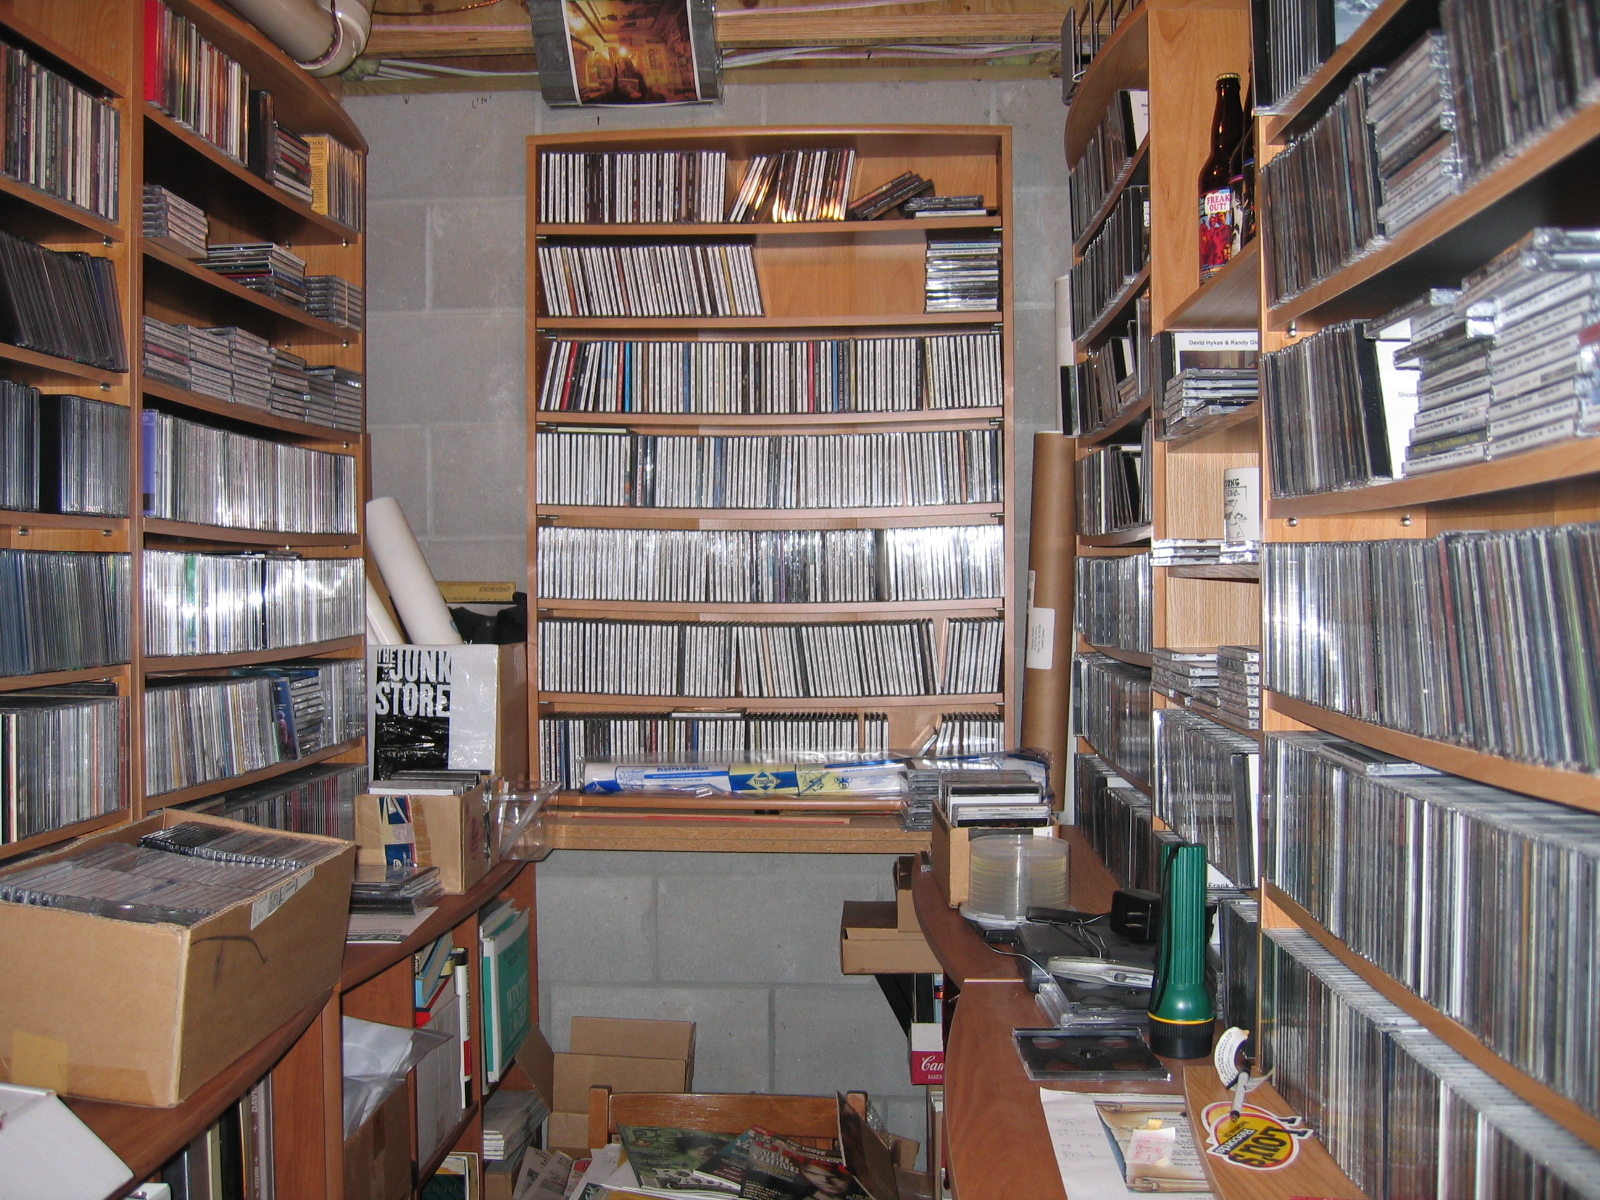 Our vast collection of popular music for performances in the director's room